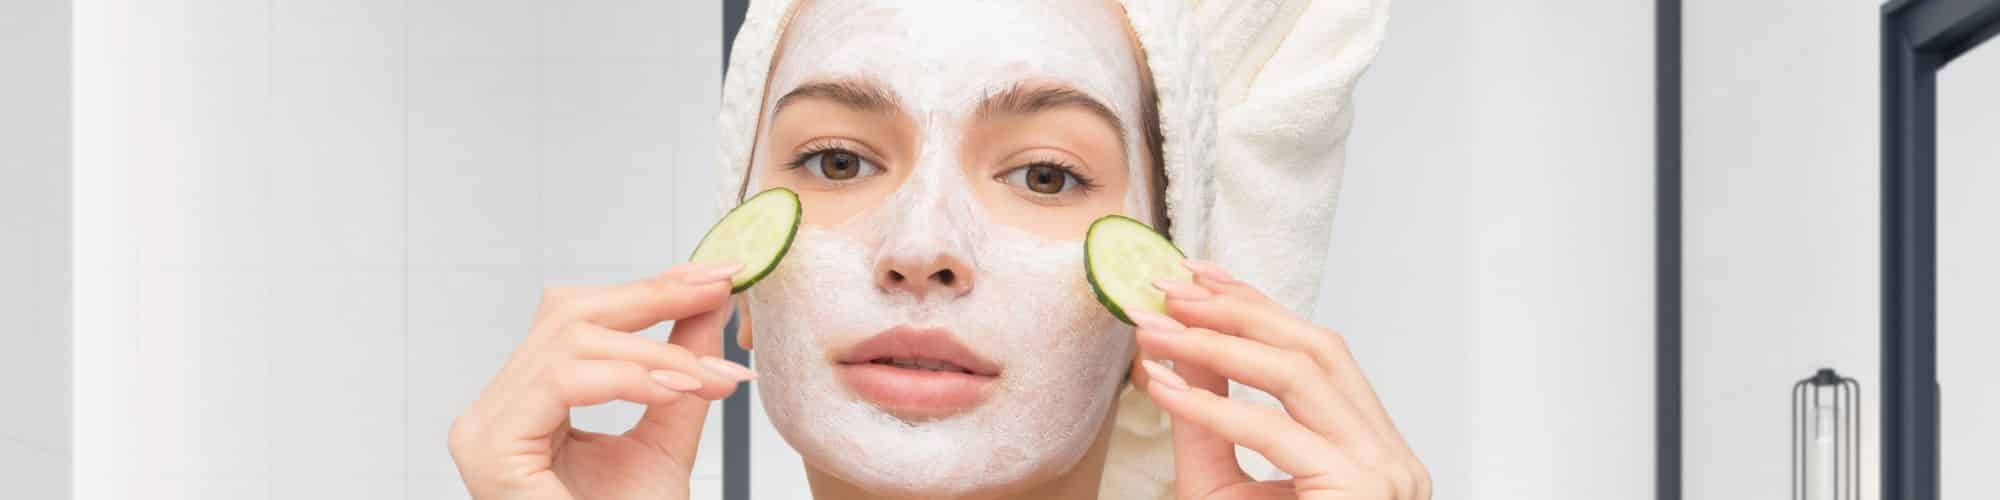 A teenager in a spa robe with a face mask taking cucumbers from her eyes